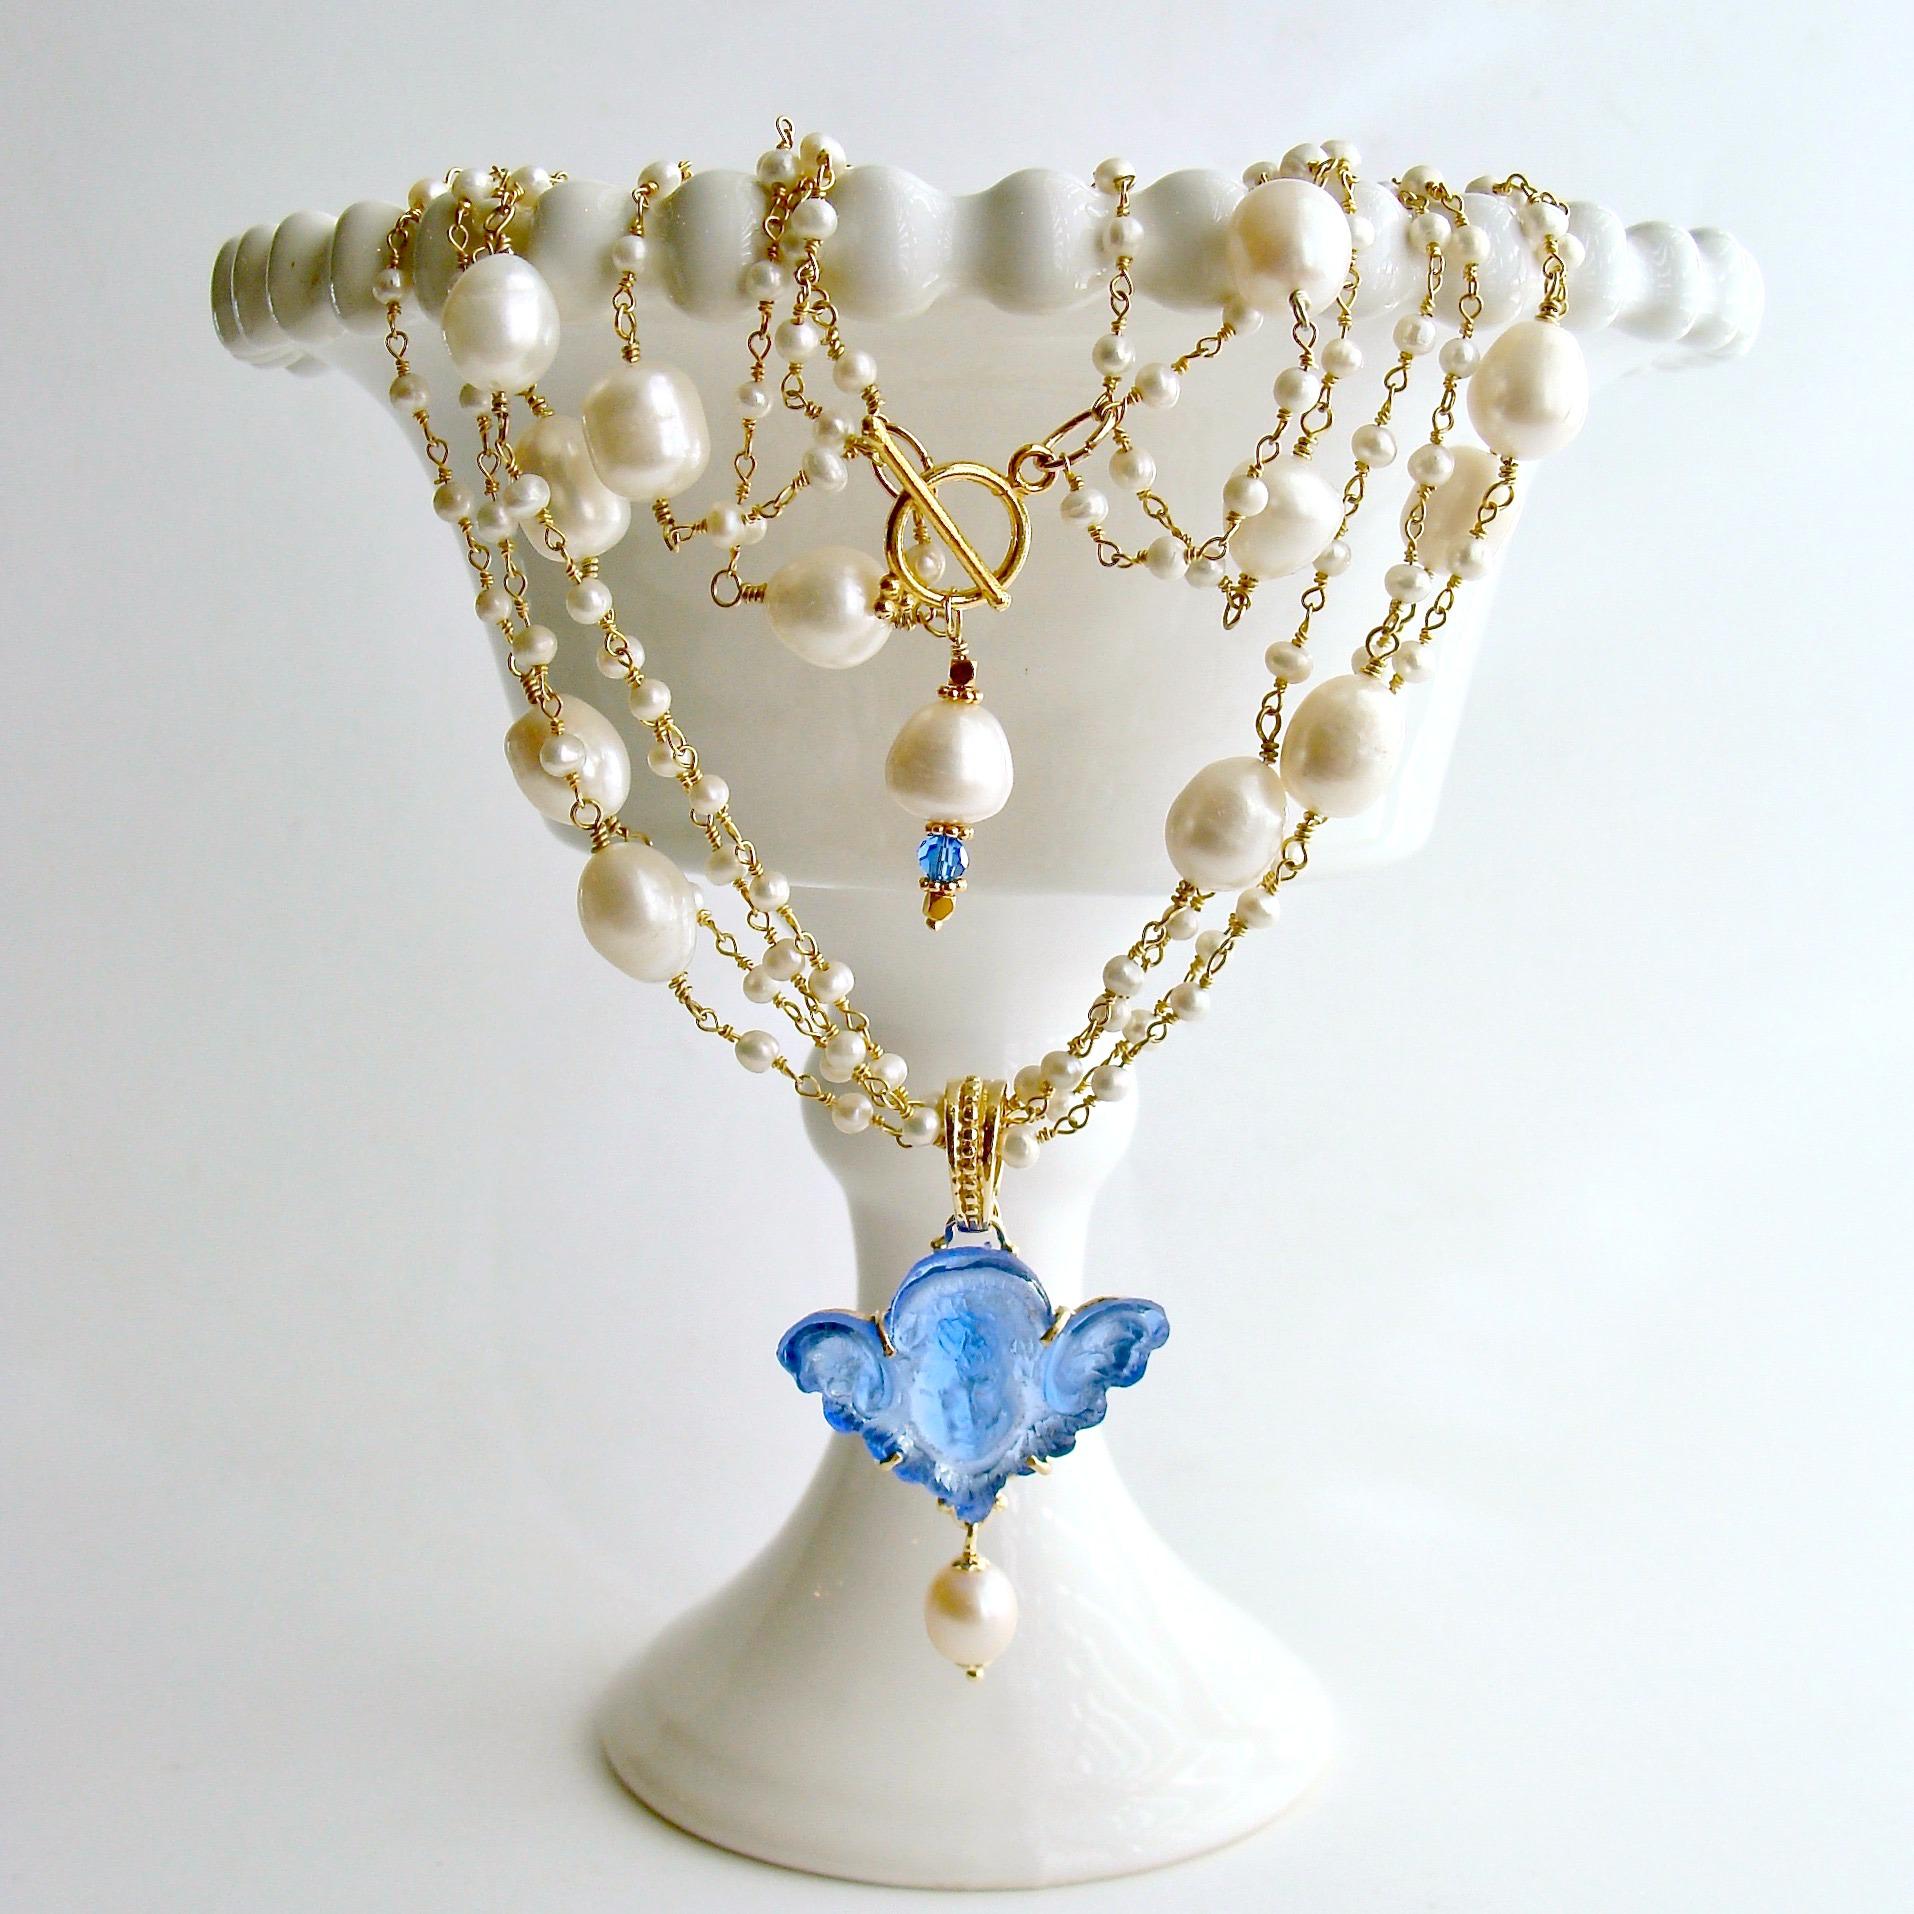 Taormina II Cherub Necklace.

The elegant beauty of simple strands of hand-linked creamy satin pearls, intercepted by larger baroque pearls, is the perfect compliment to this neoclassical cornflower blue Venetian glass cameo/intaglio cherub pendant.